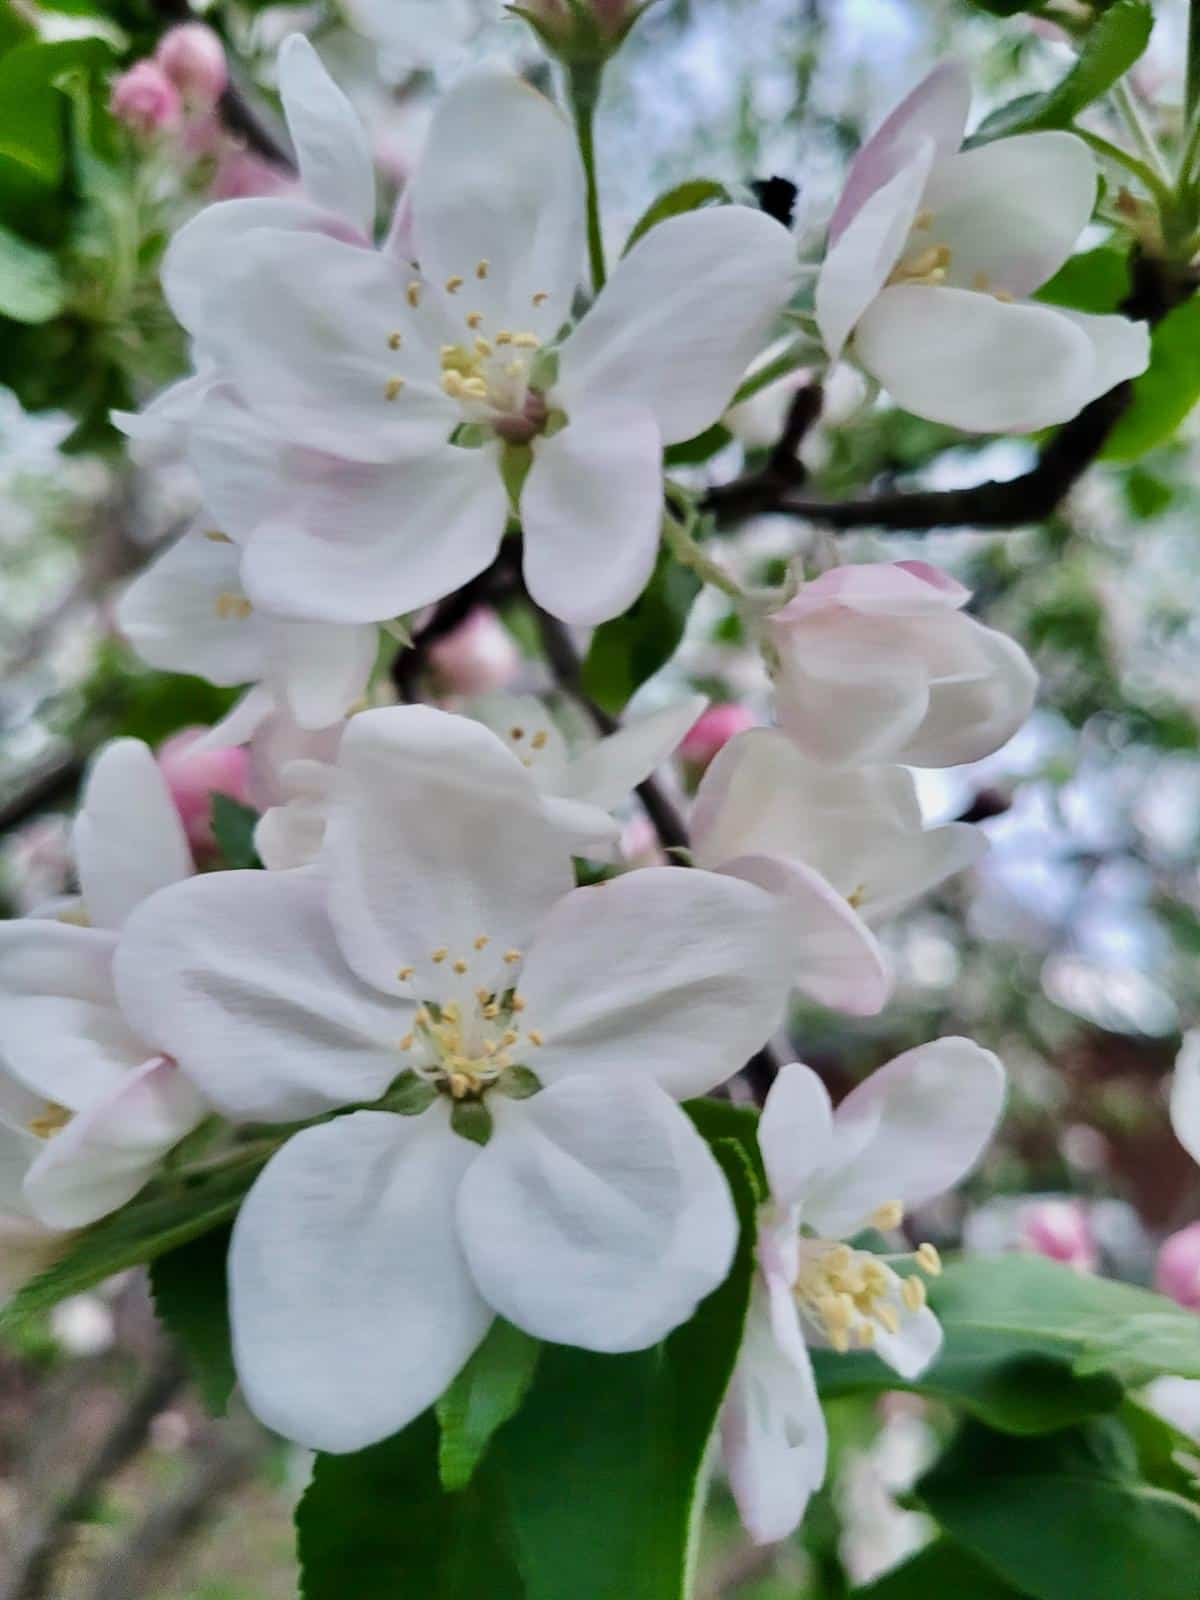 Blossoms on an apple tree